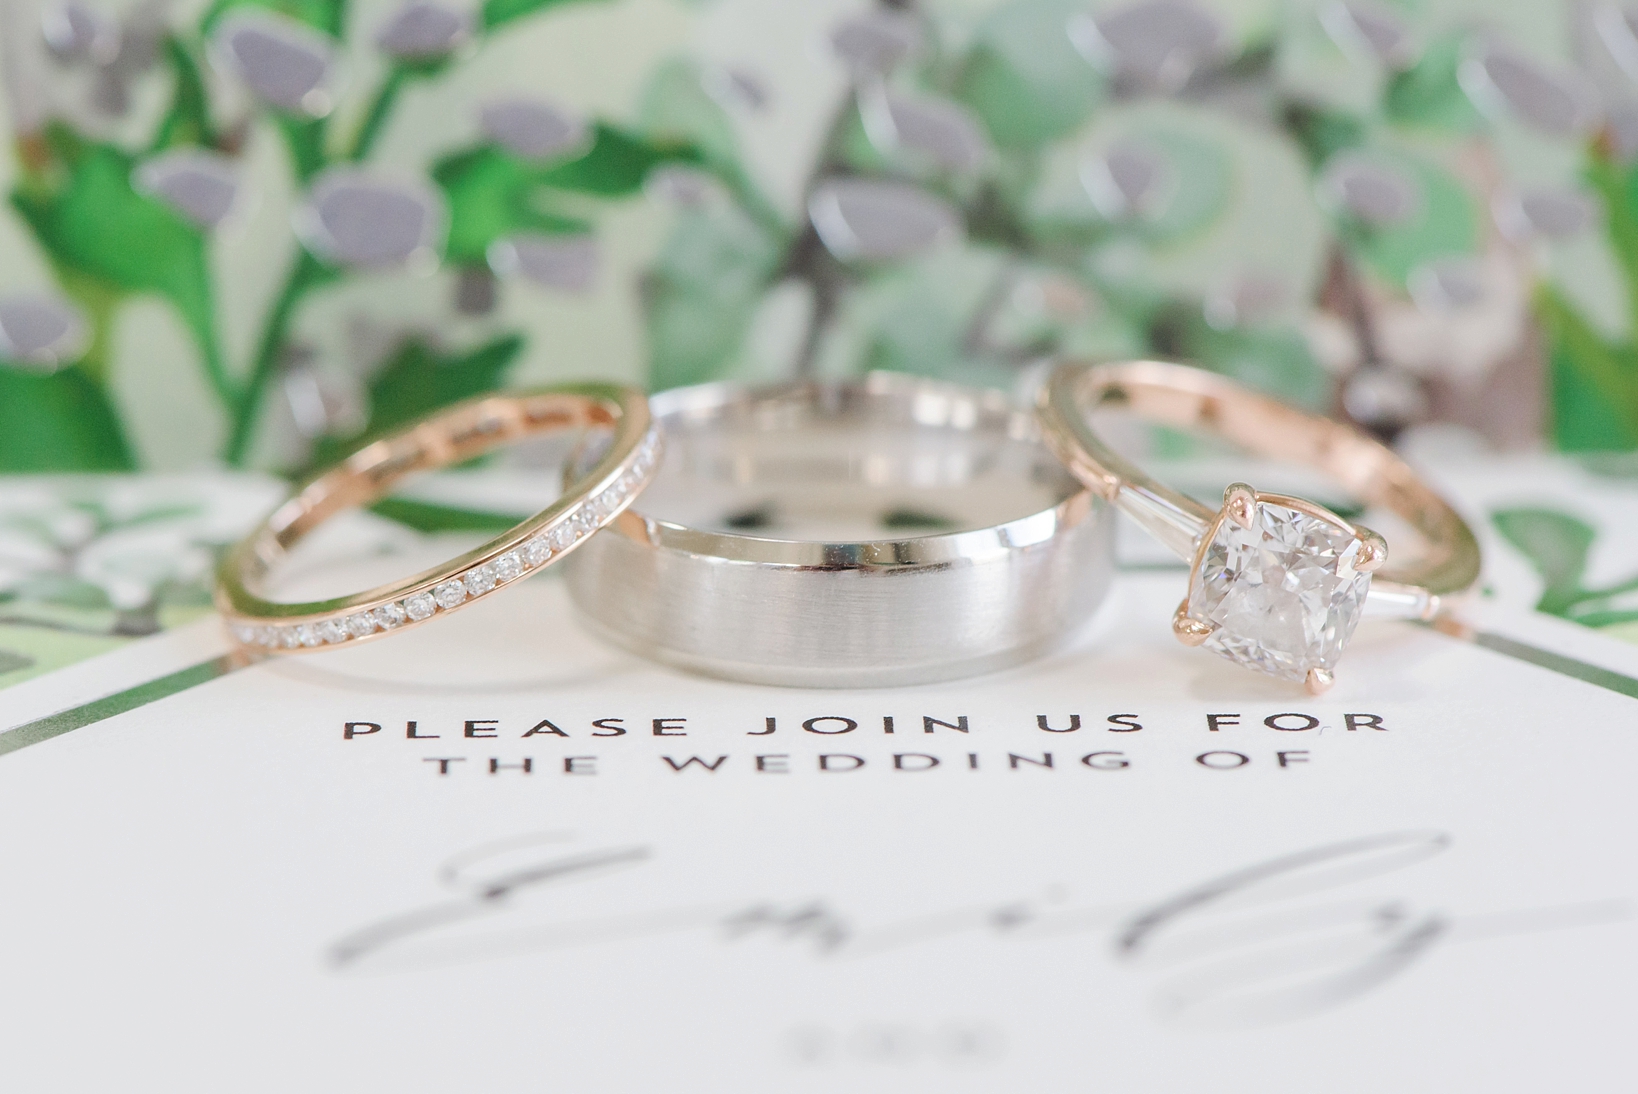 Wedding bands against a green and silver foil invitation